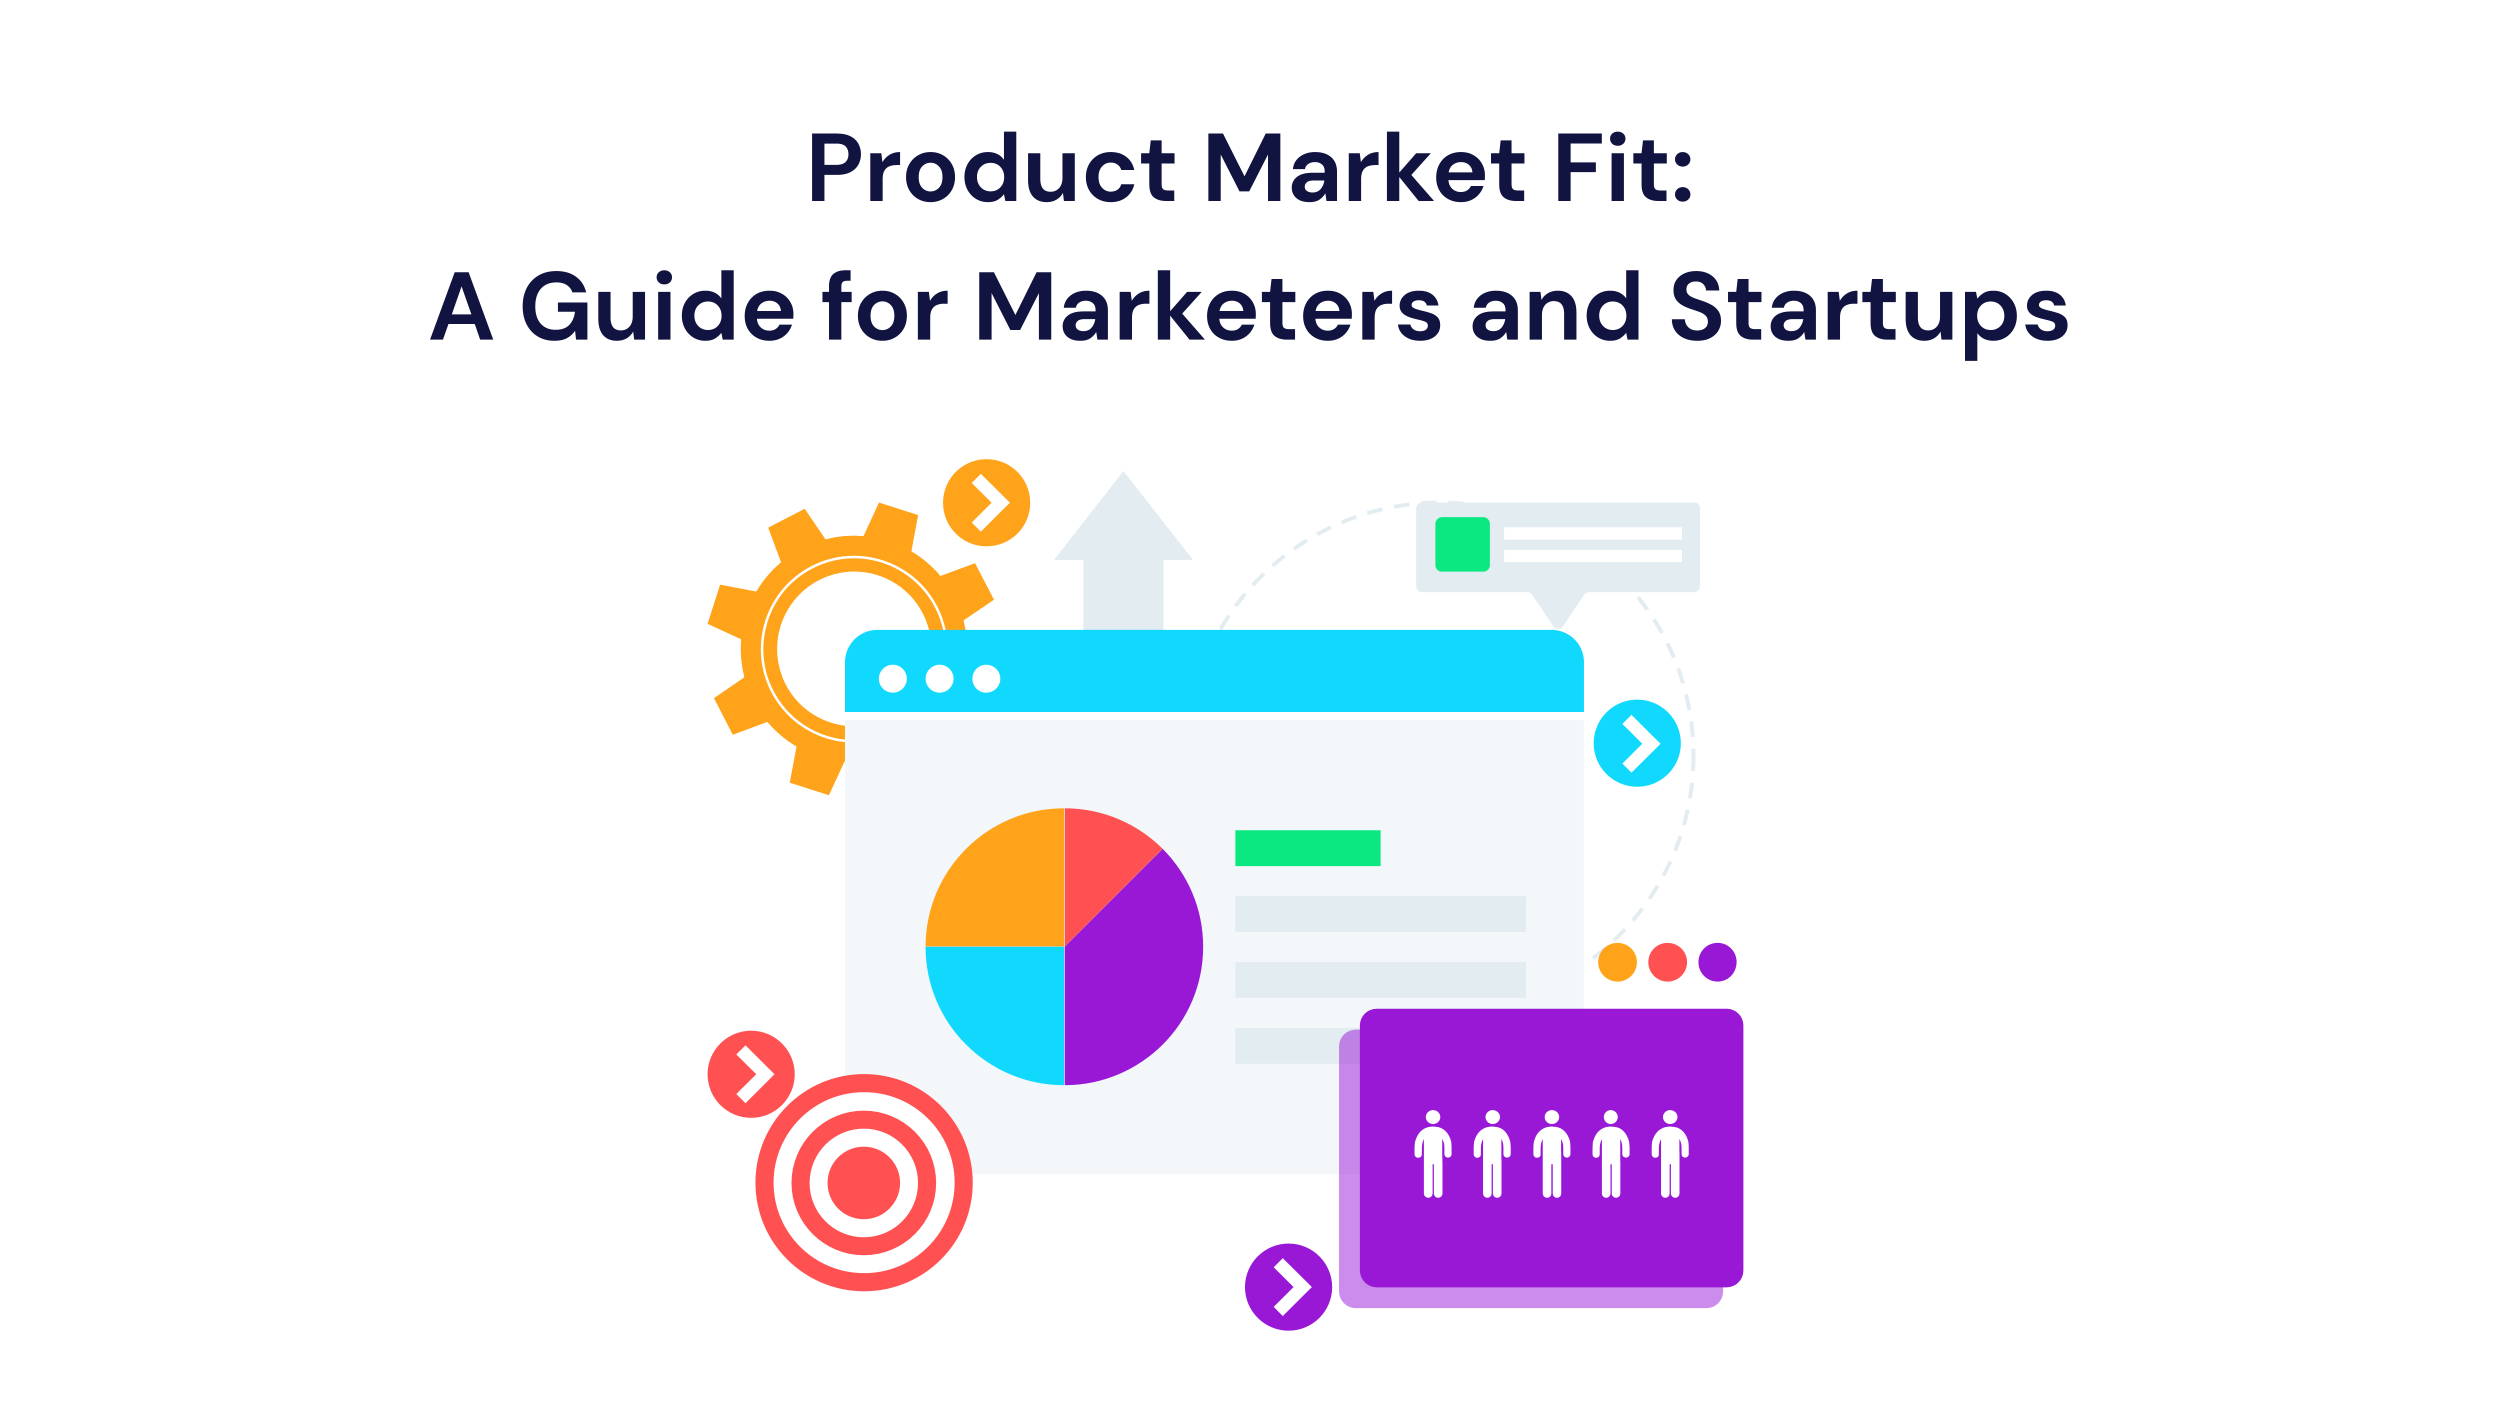 Product Market Fit: A Guide for Marketers and Startups